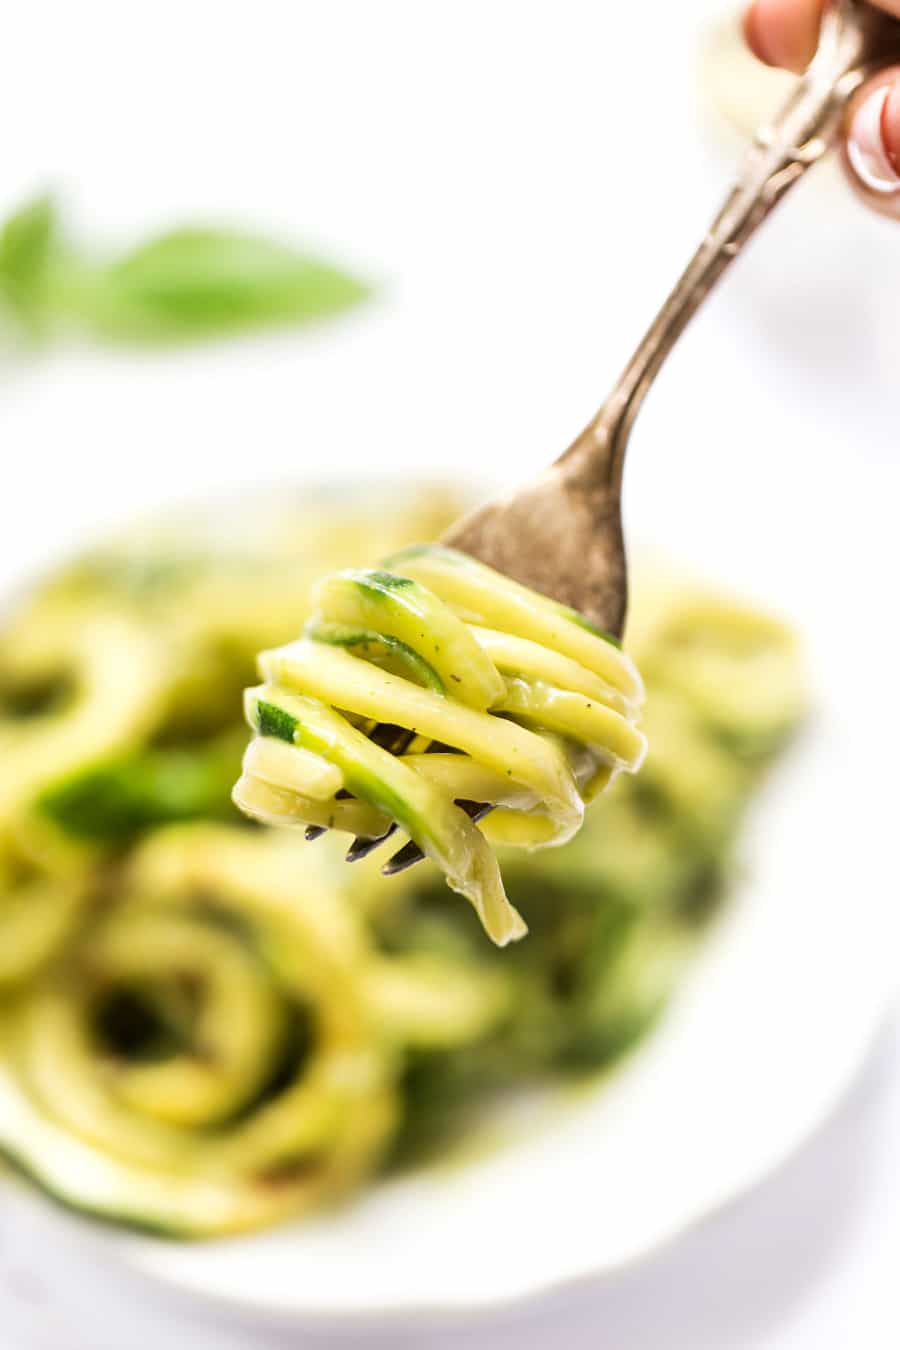 Super simple AVOCADO ALFREDO sauce to use for any pasta...including zucchini noodles!